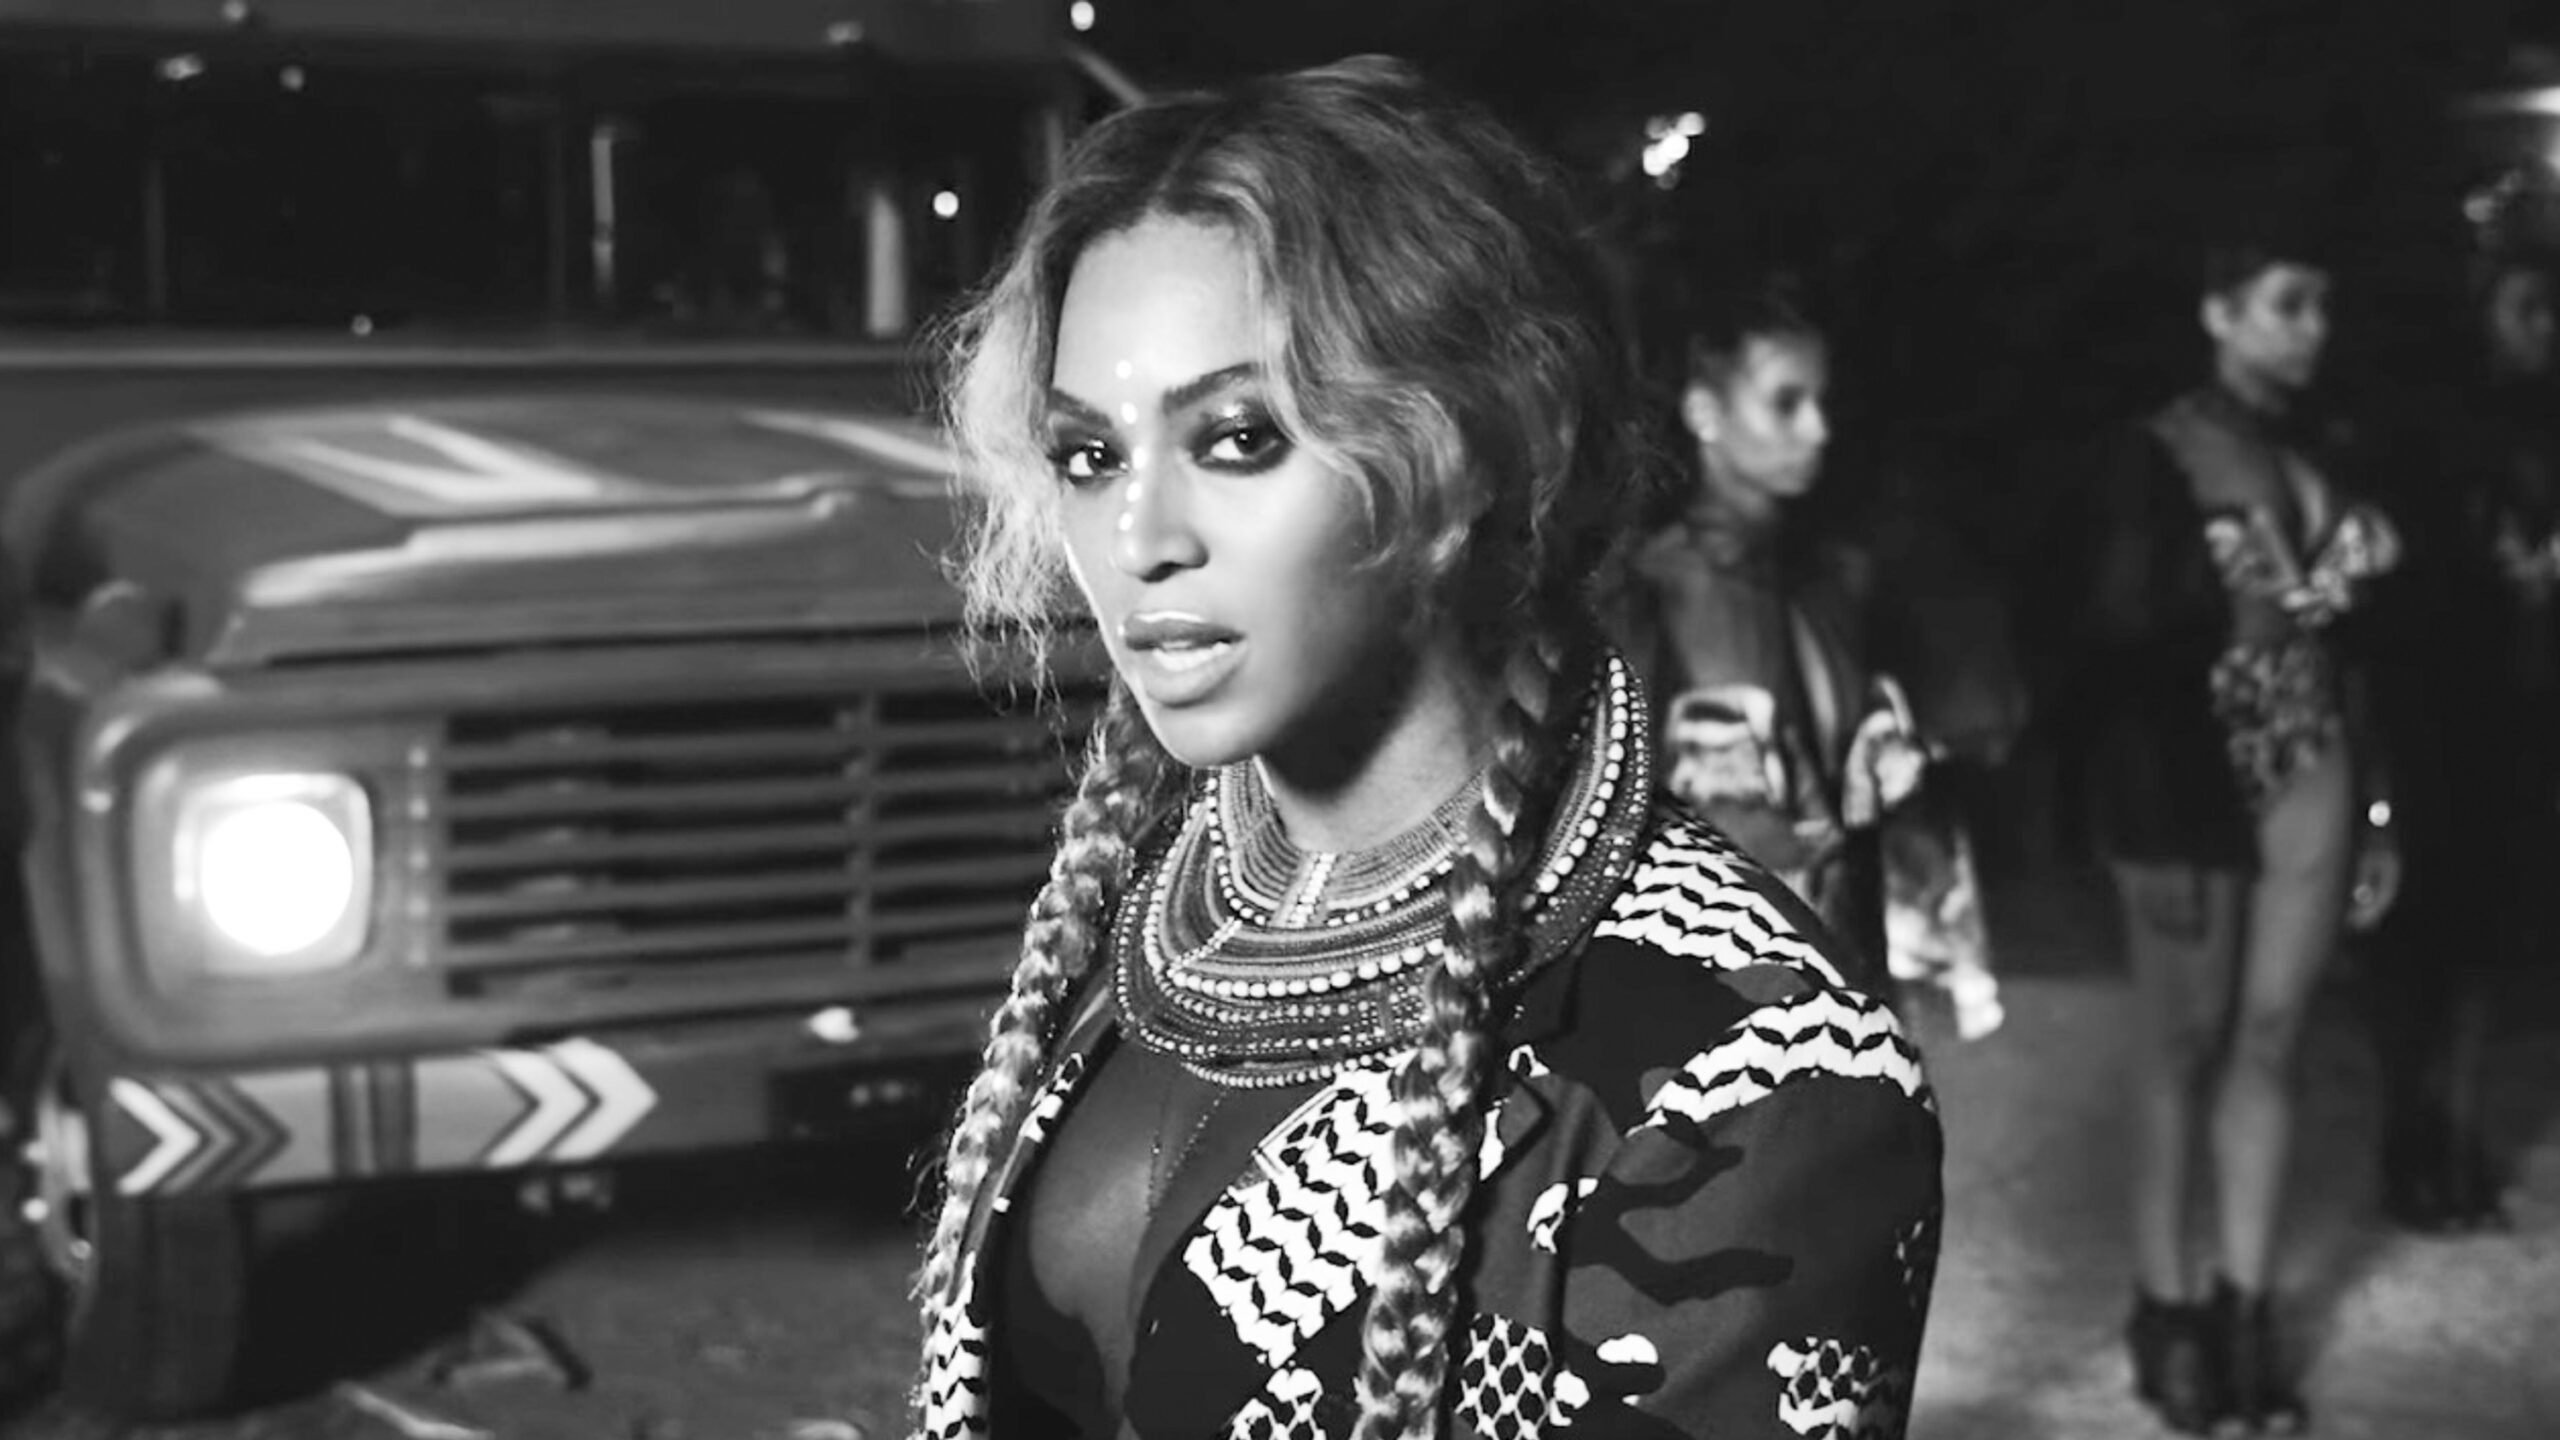 WATCH: Beyonce releases ‘Sorry’ music video starring Serena Williams